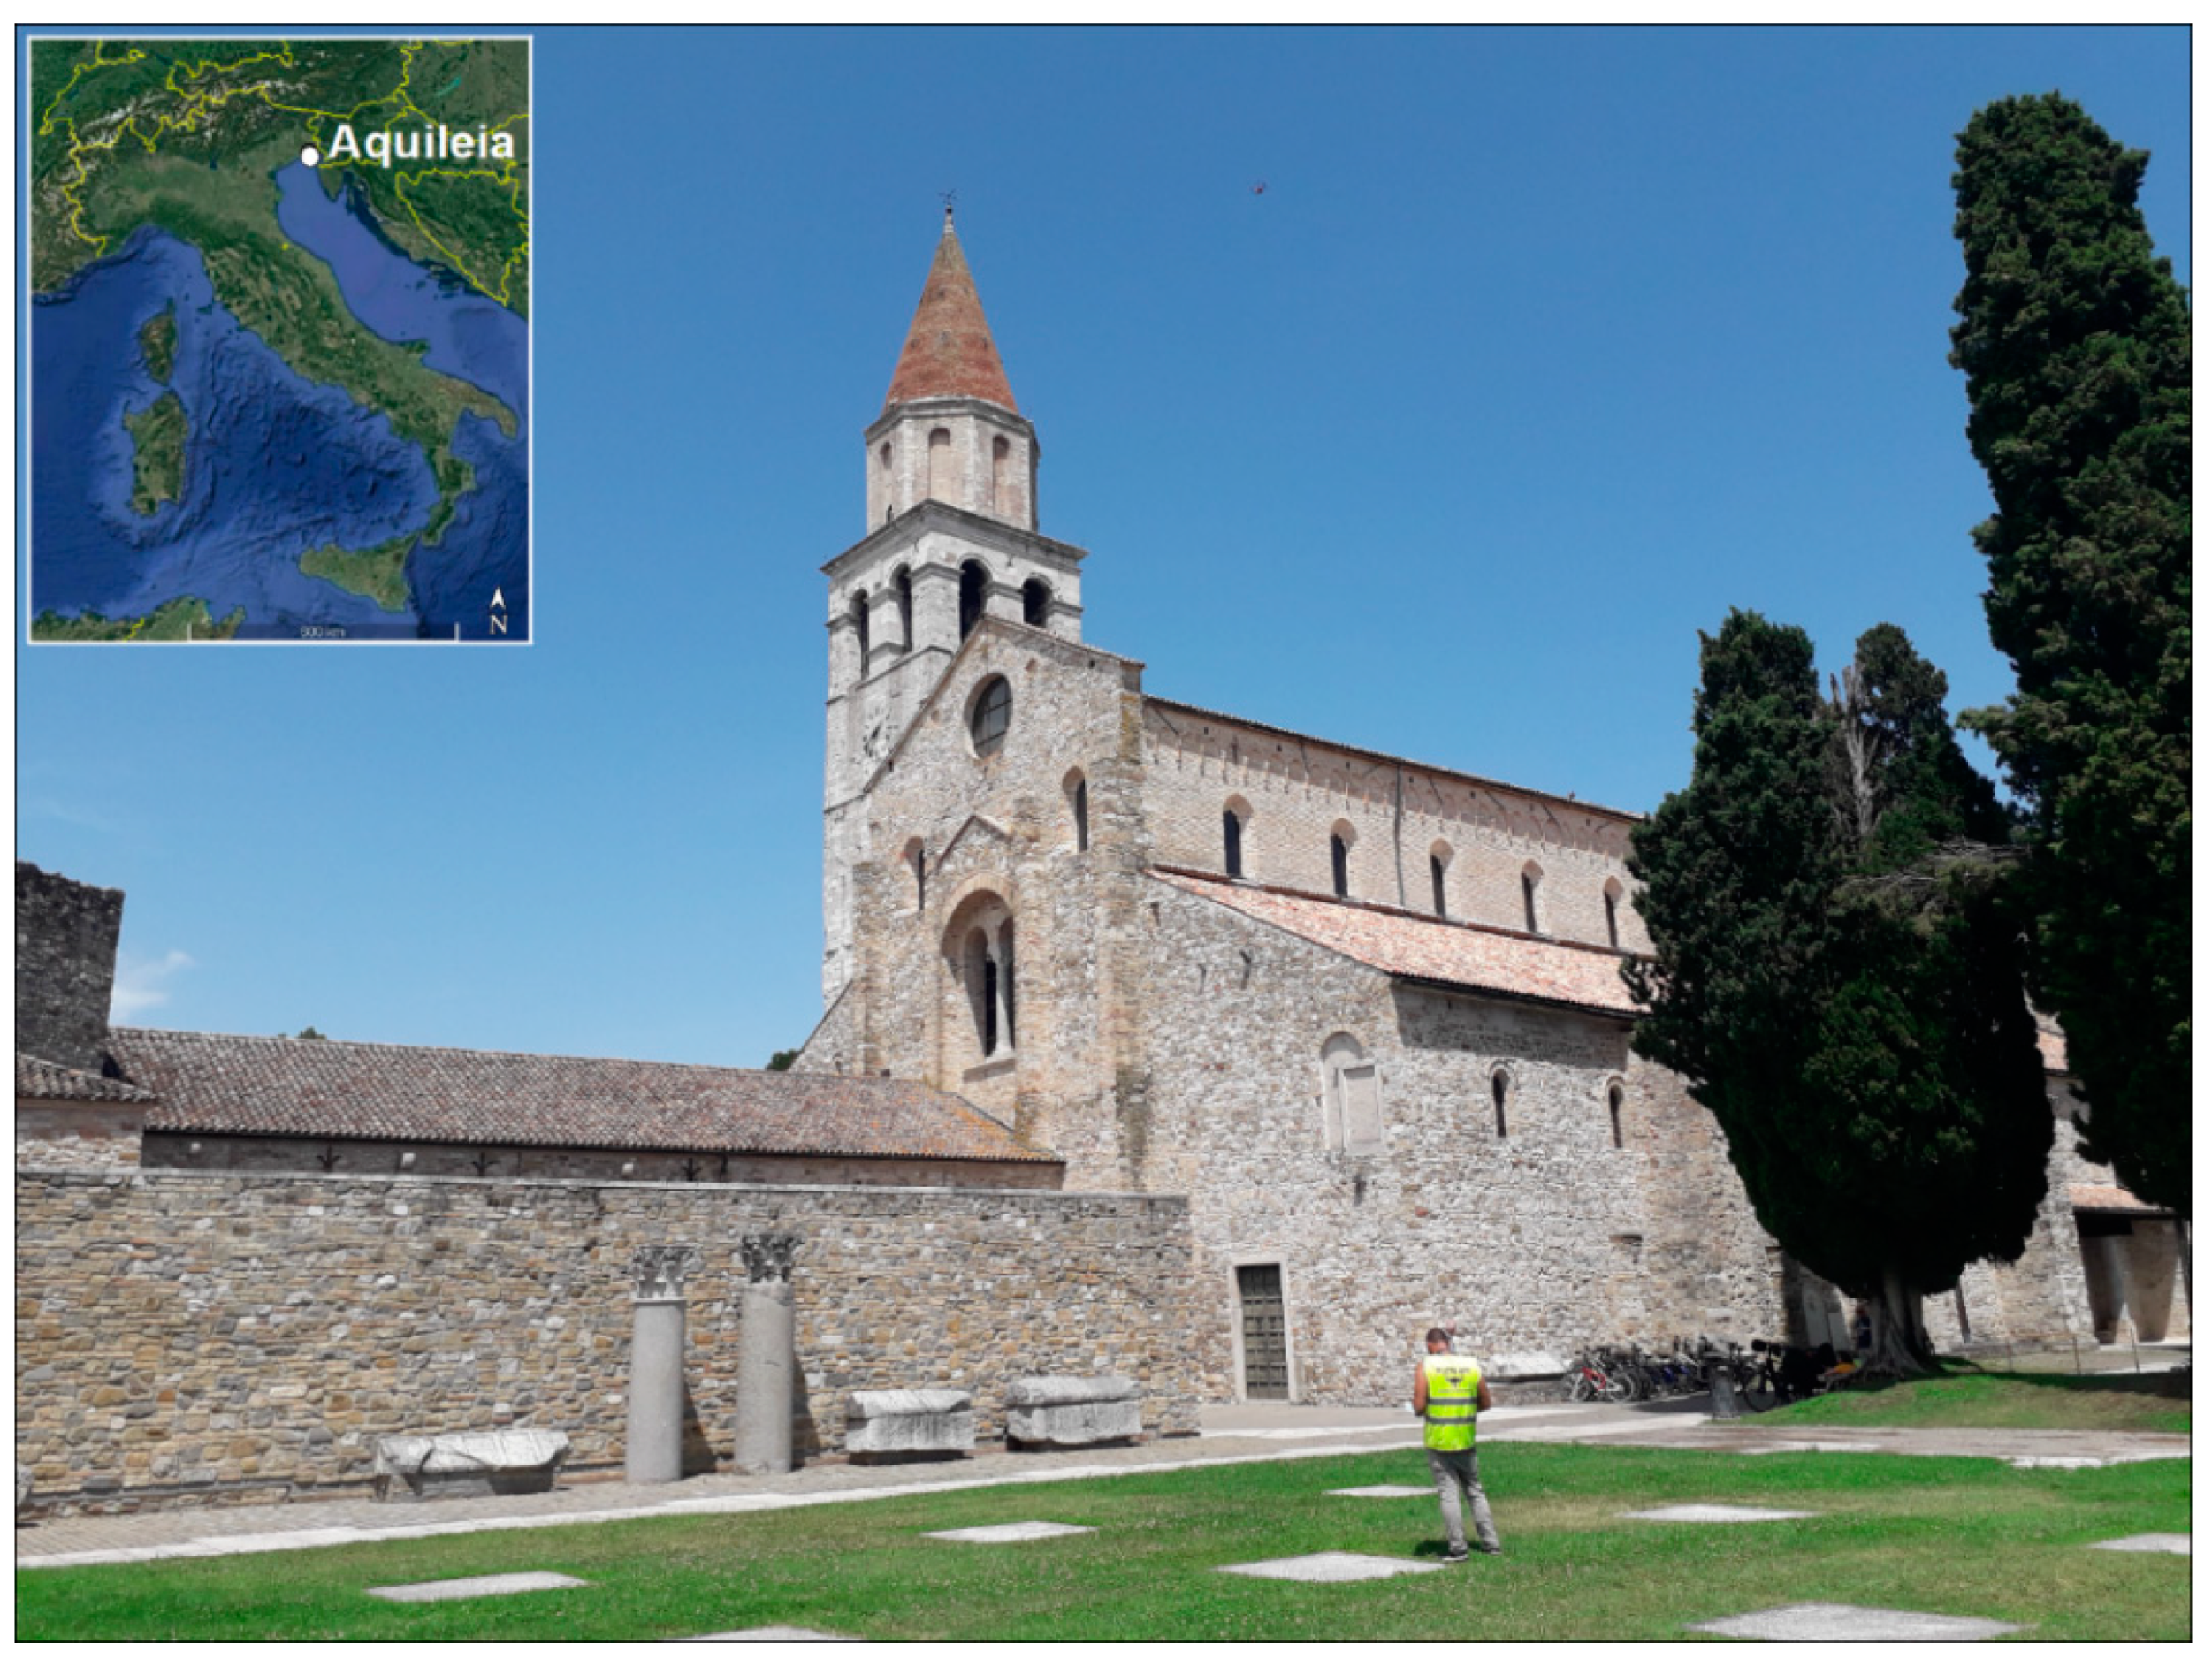 Remote Sensing | Free Full-Text | Three-Dimensional Modeling and  Non-Invasive Diagnosis of a Huge and Complex Heritage Building: The  Patriarchal Basilica of Santa Maria Assunta in Aquileia (Udine, Italy)